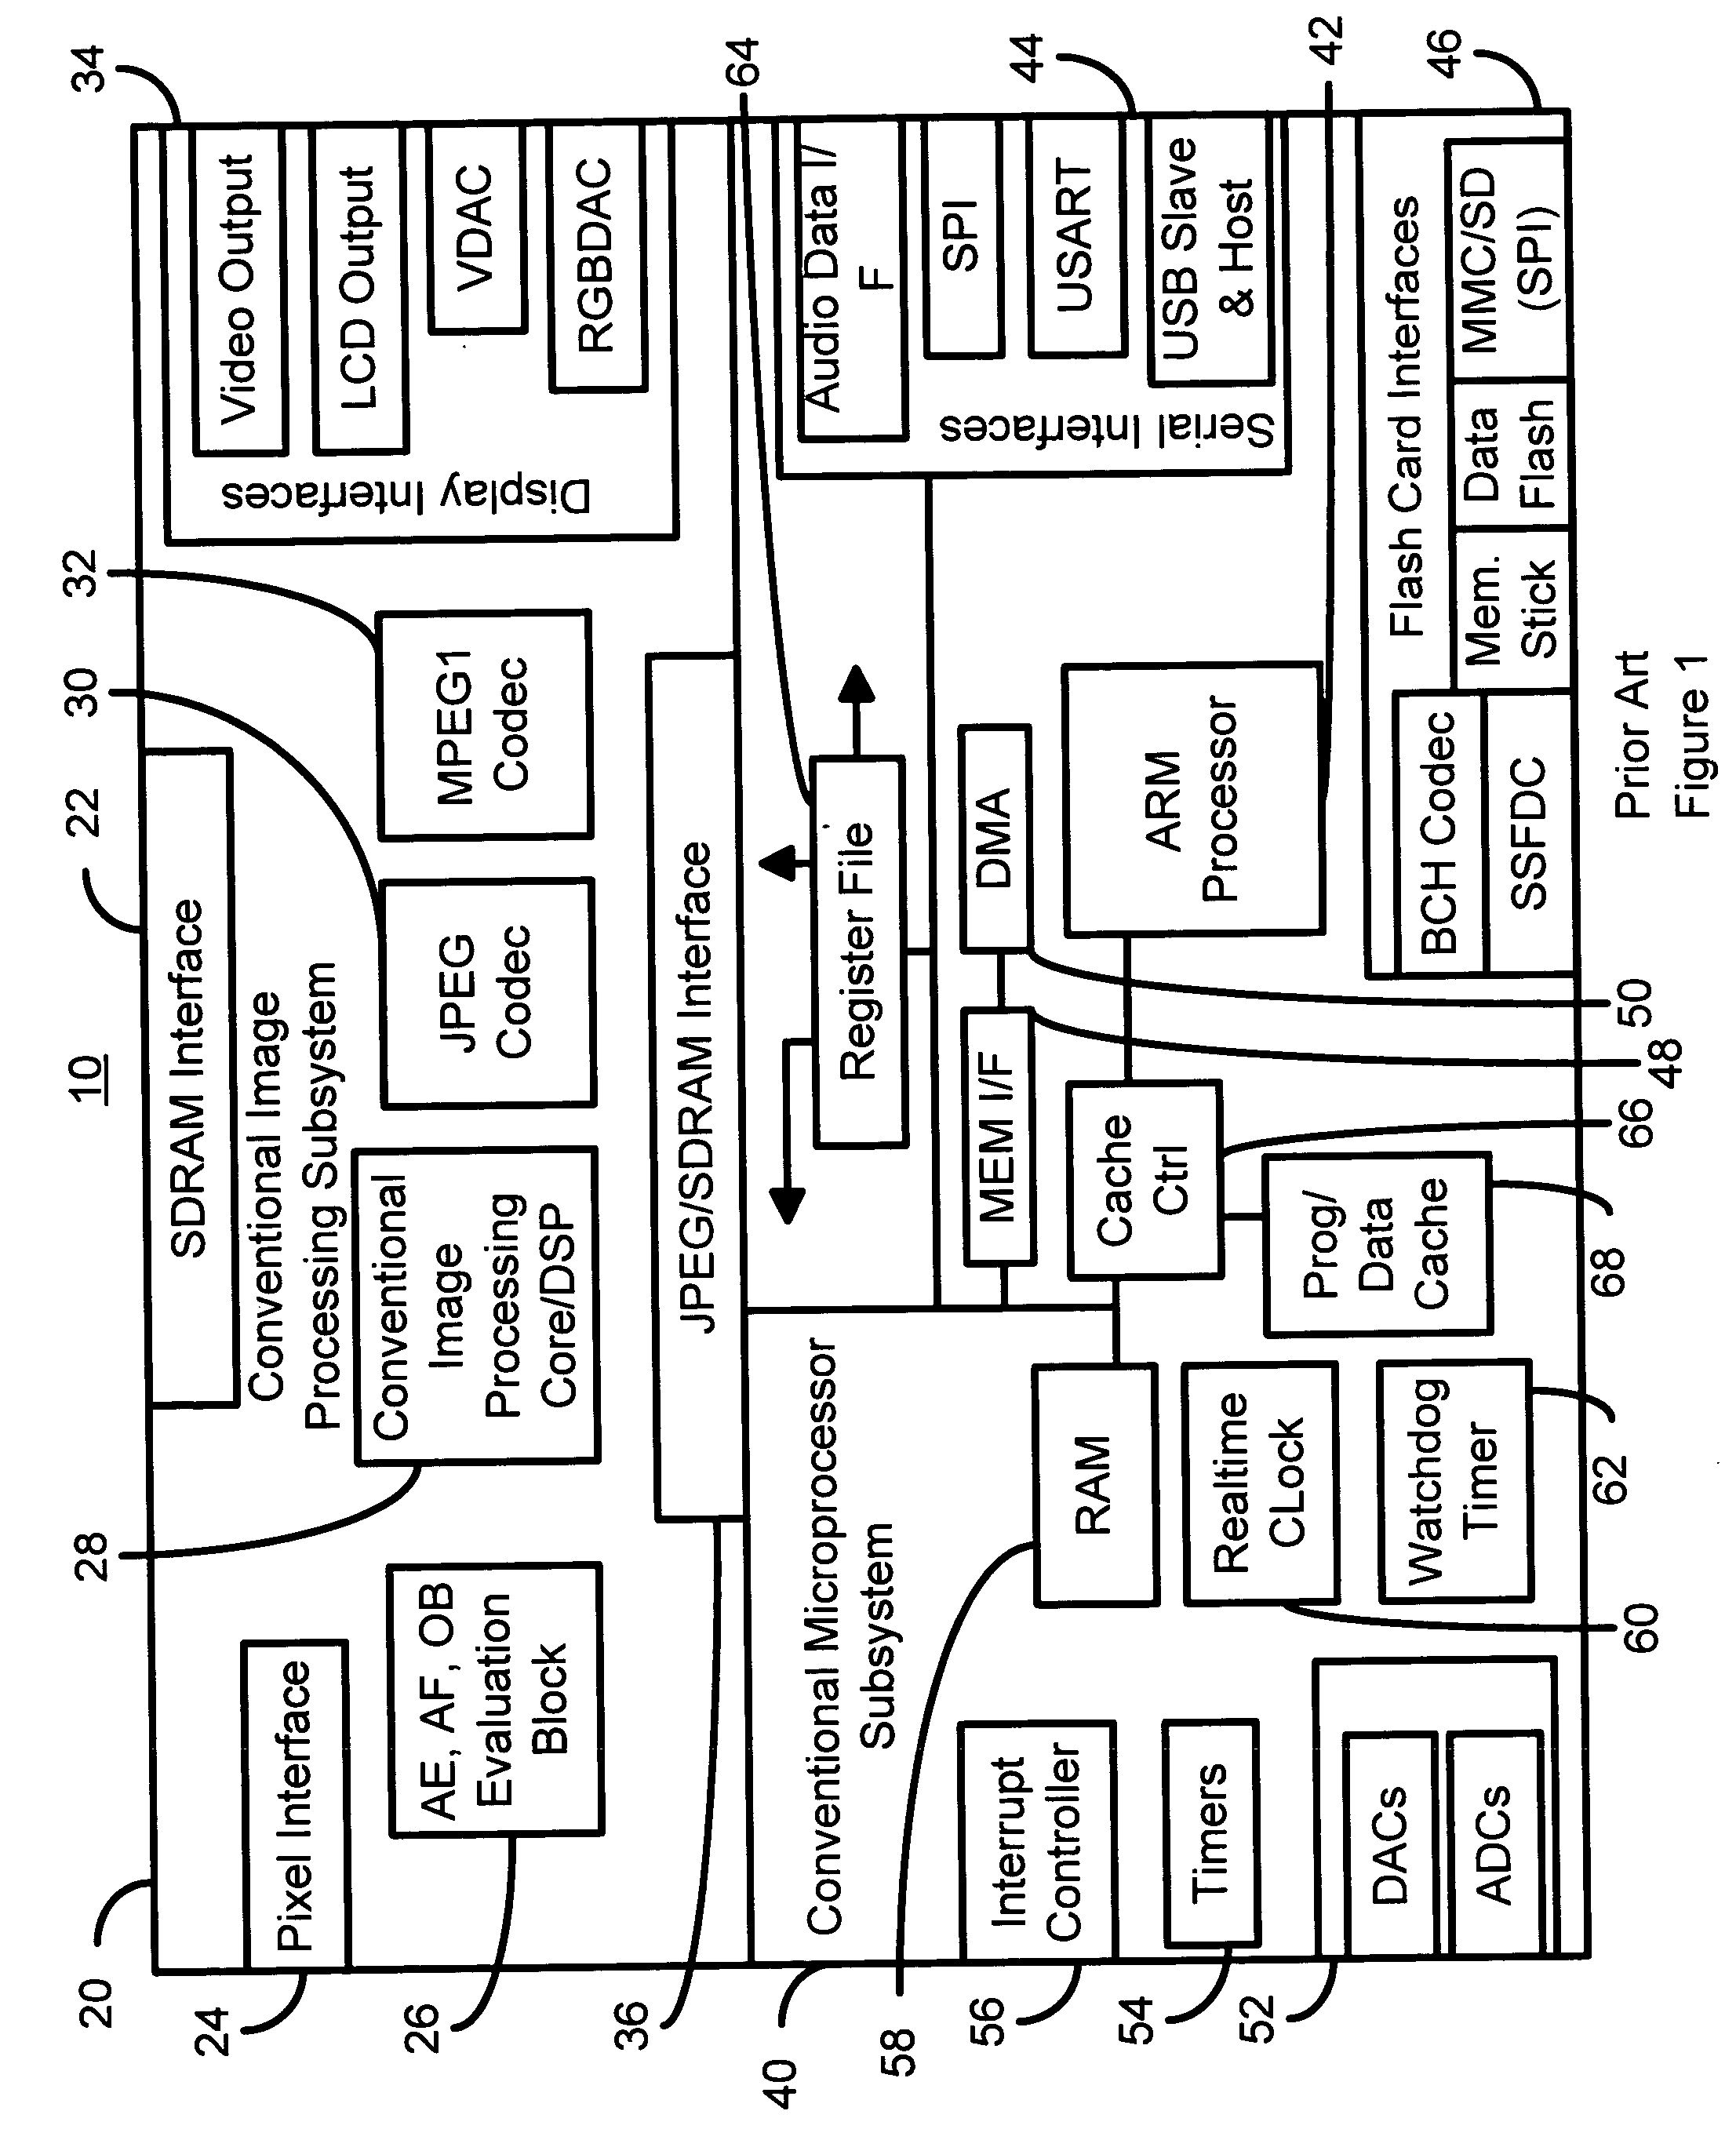 Embedded metal-programmable image processing array for digital still camera and camrecorder products